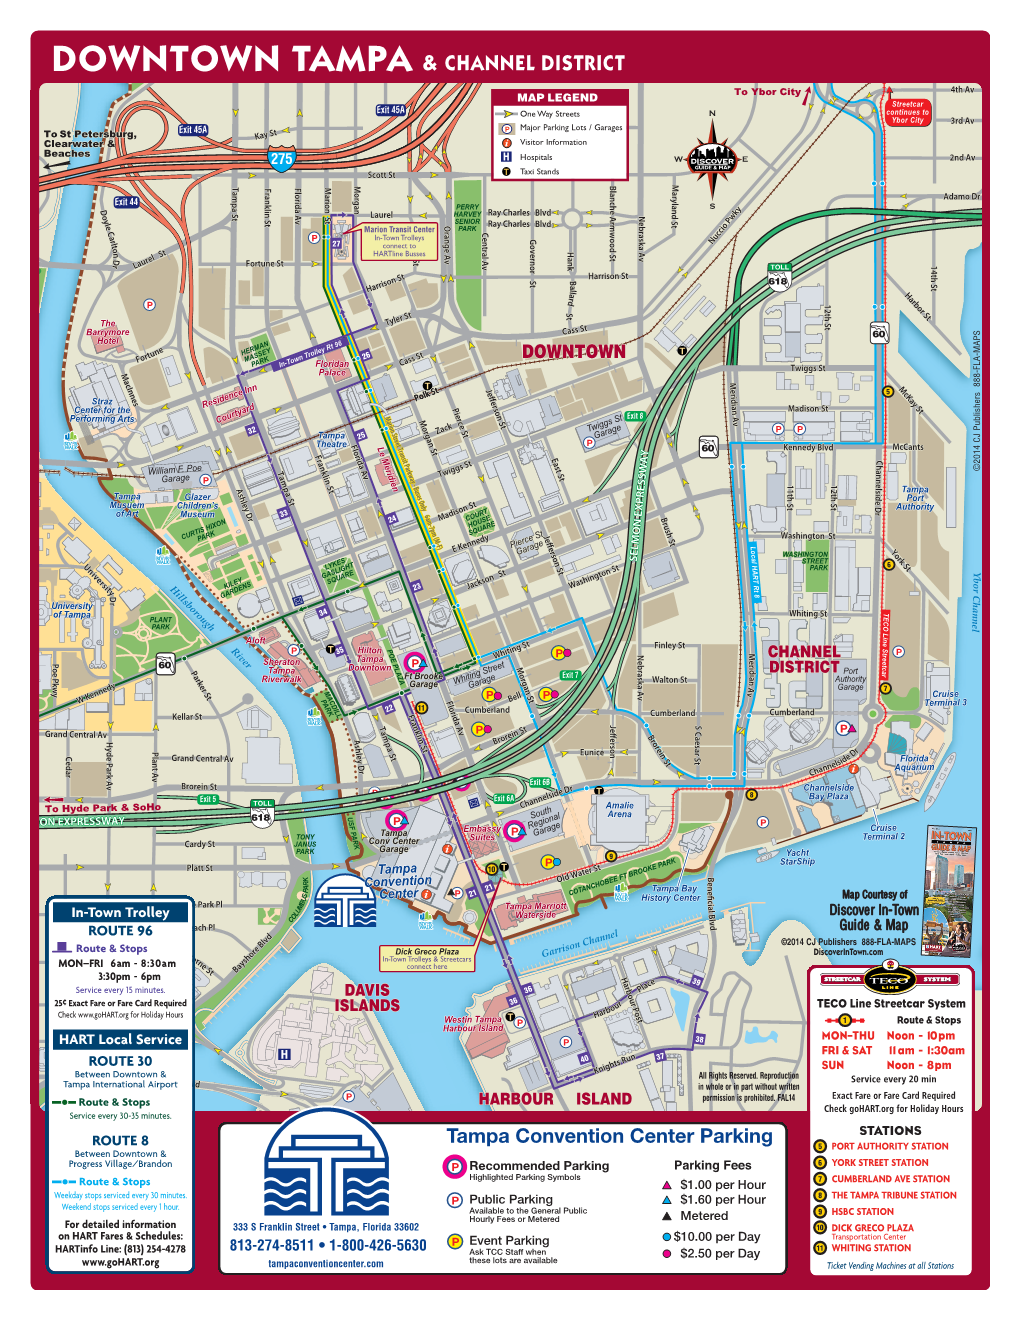 Tampa Convention Center Parking O ROUTE 8 a N a a O a R PORT AUTHORITY STATION Terrace Dr L O ≥5 K K W B F